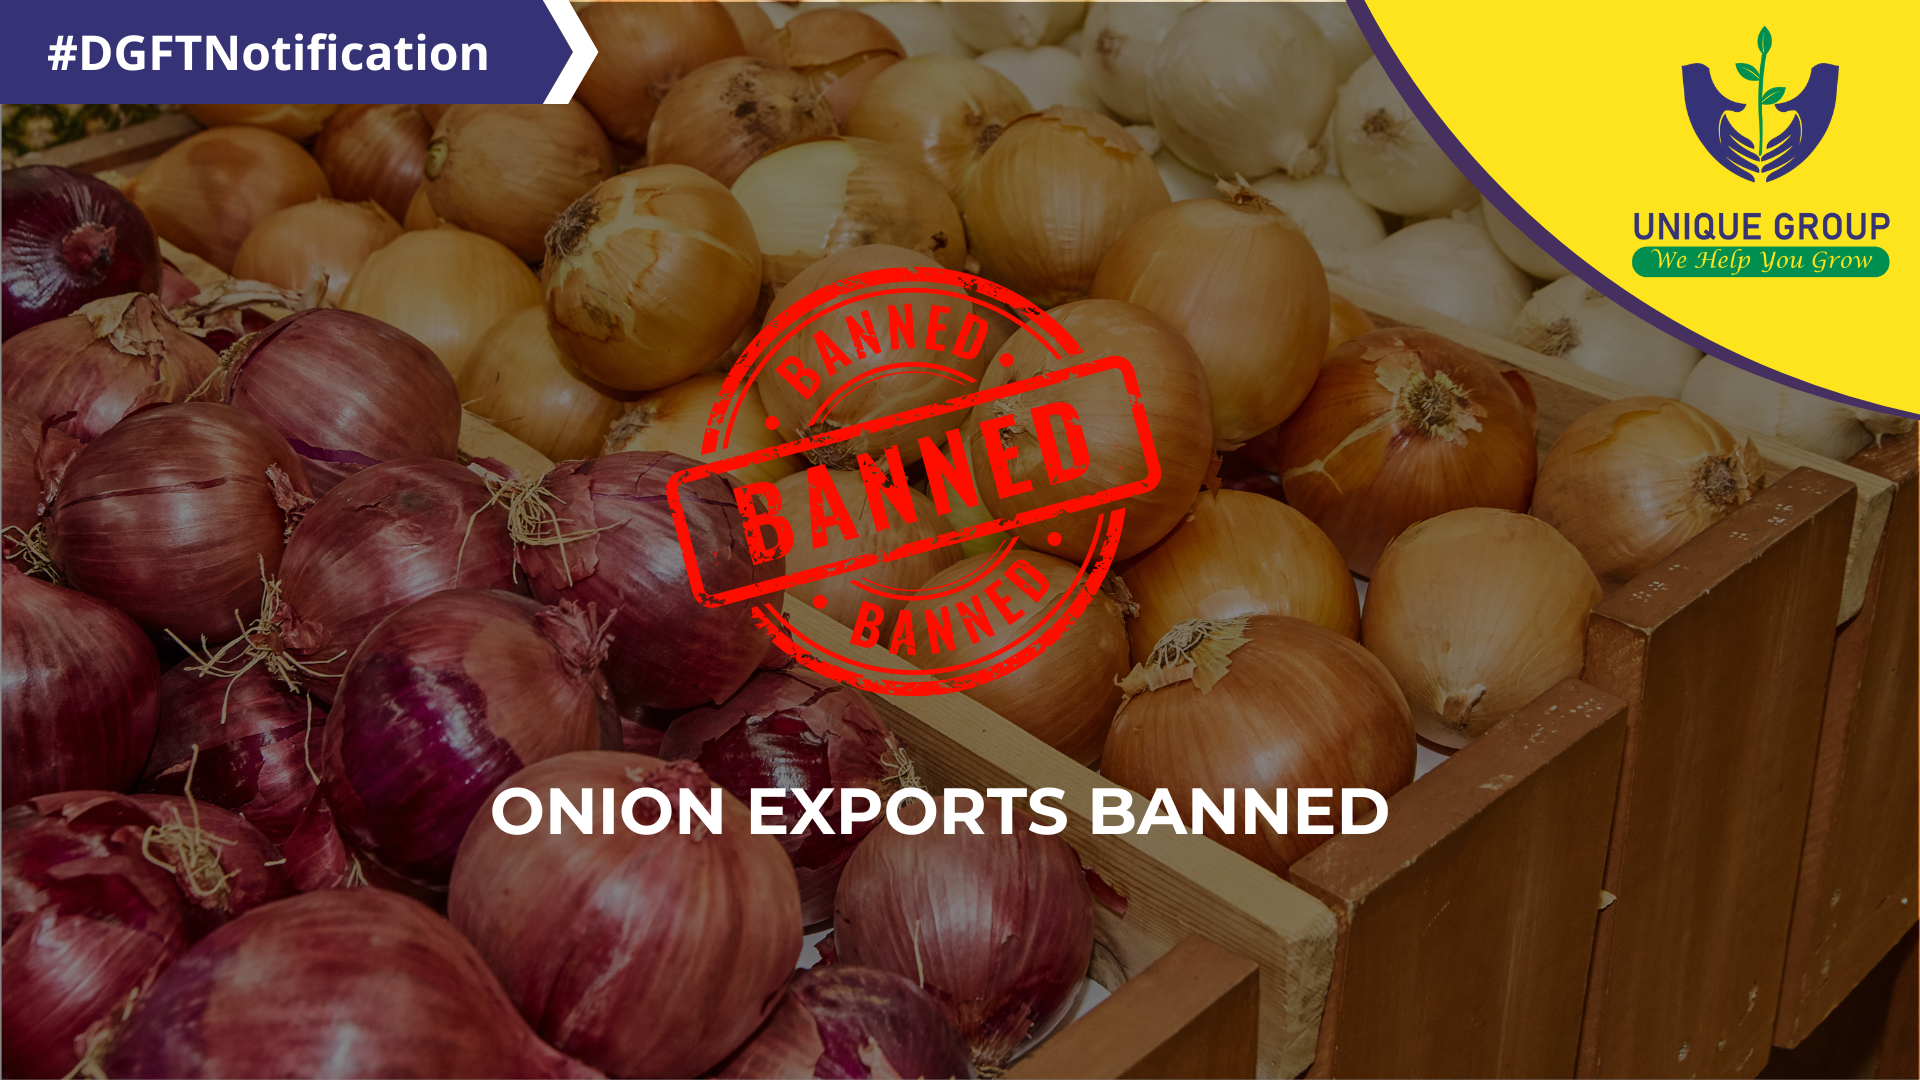 Onions Export Banned